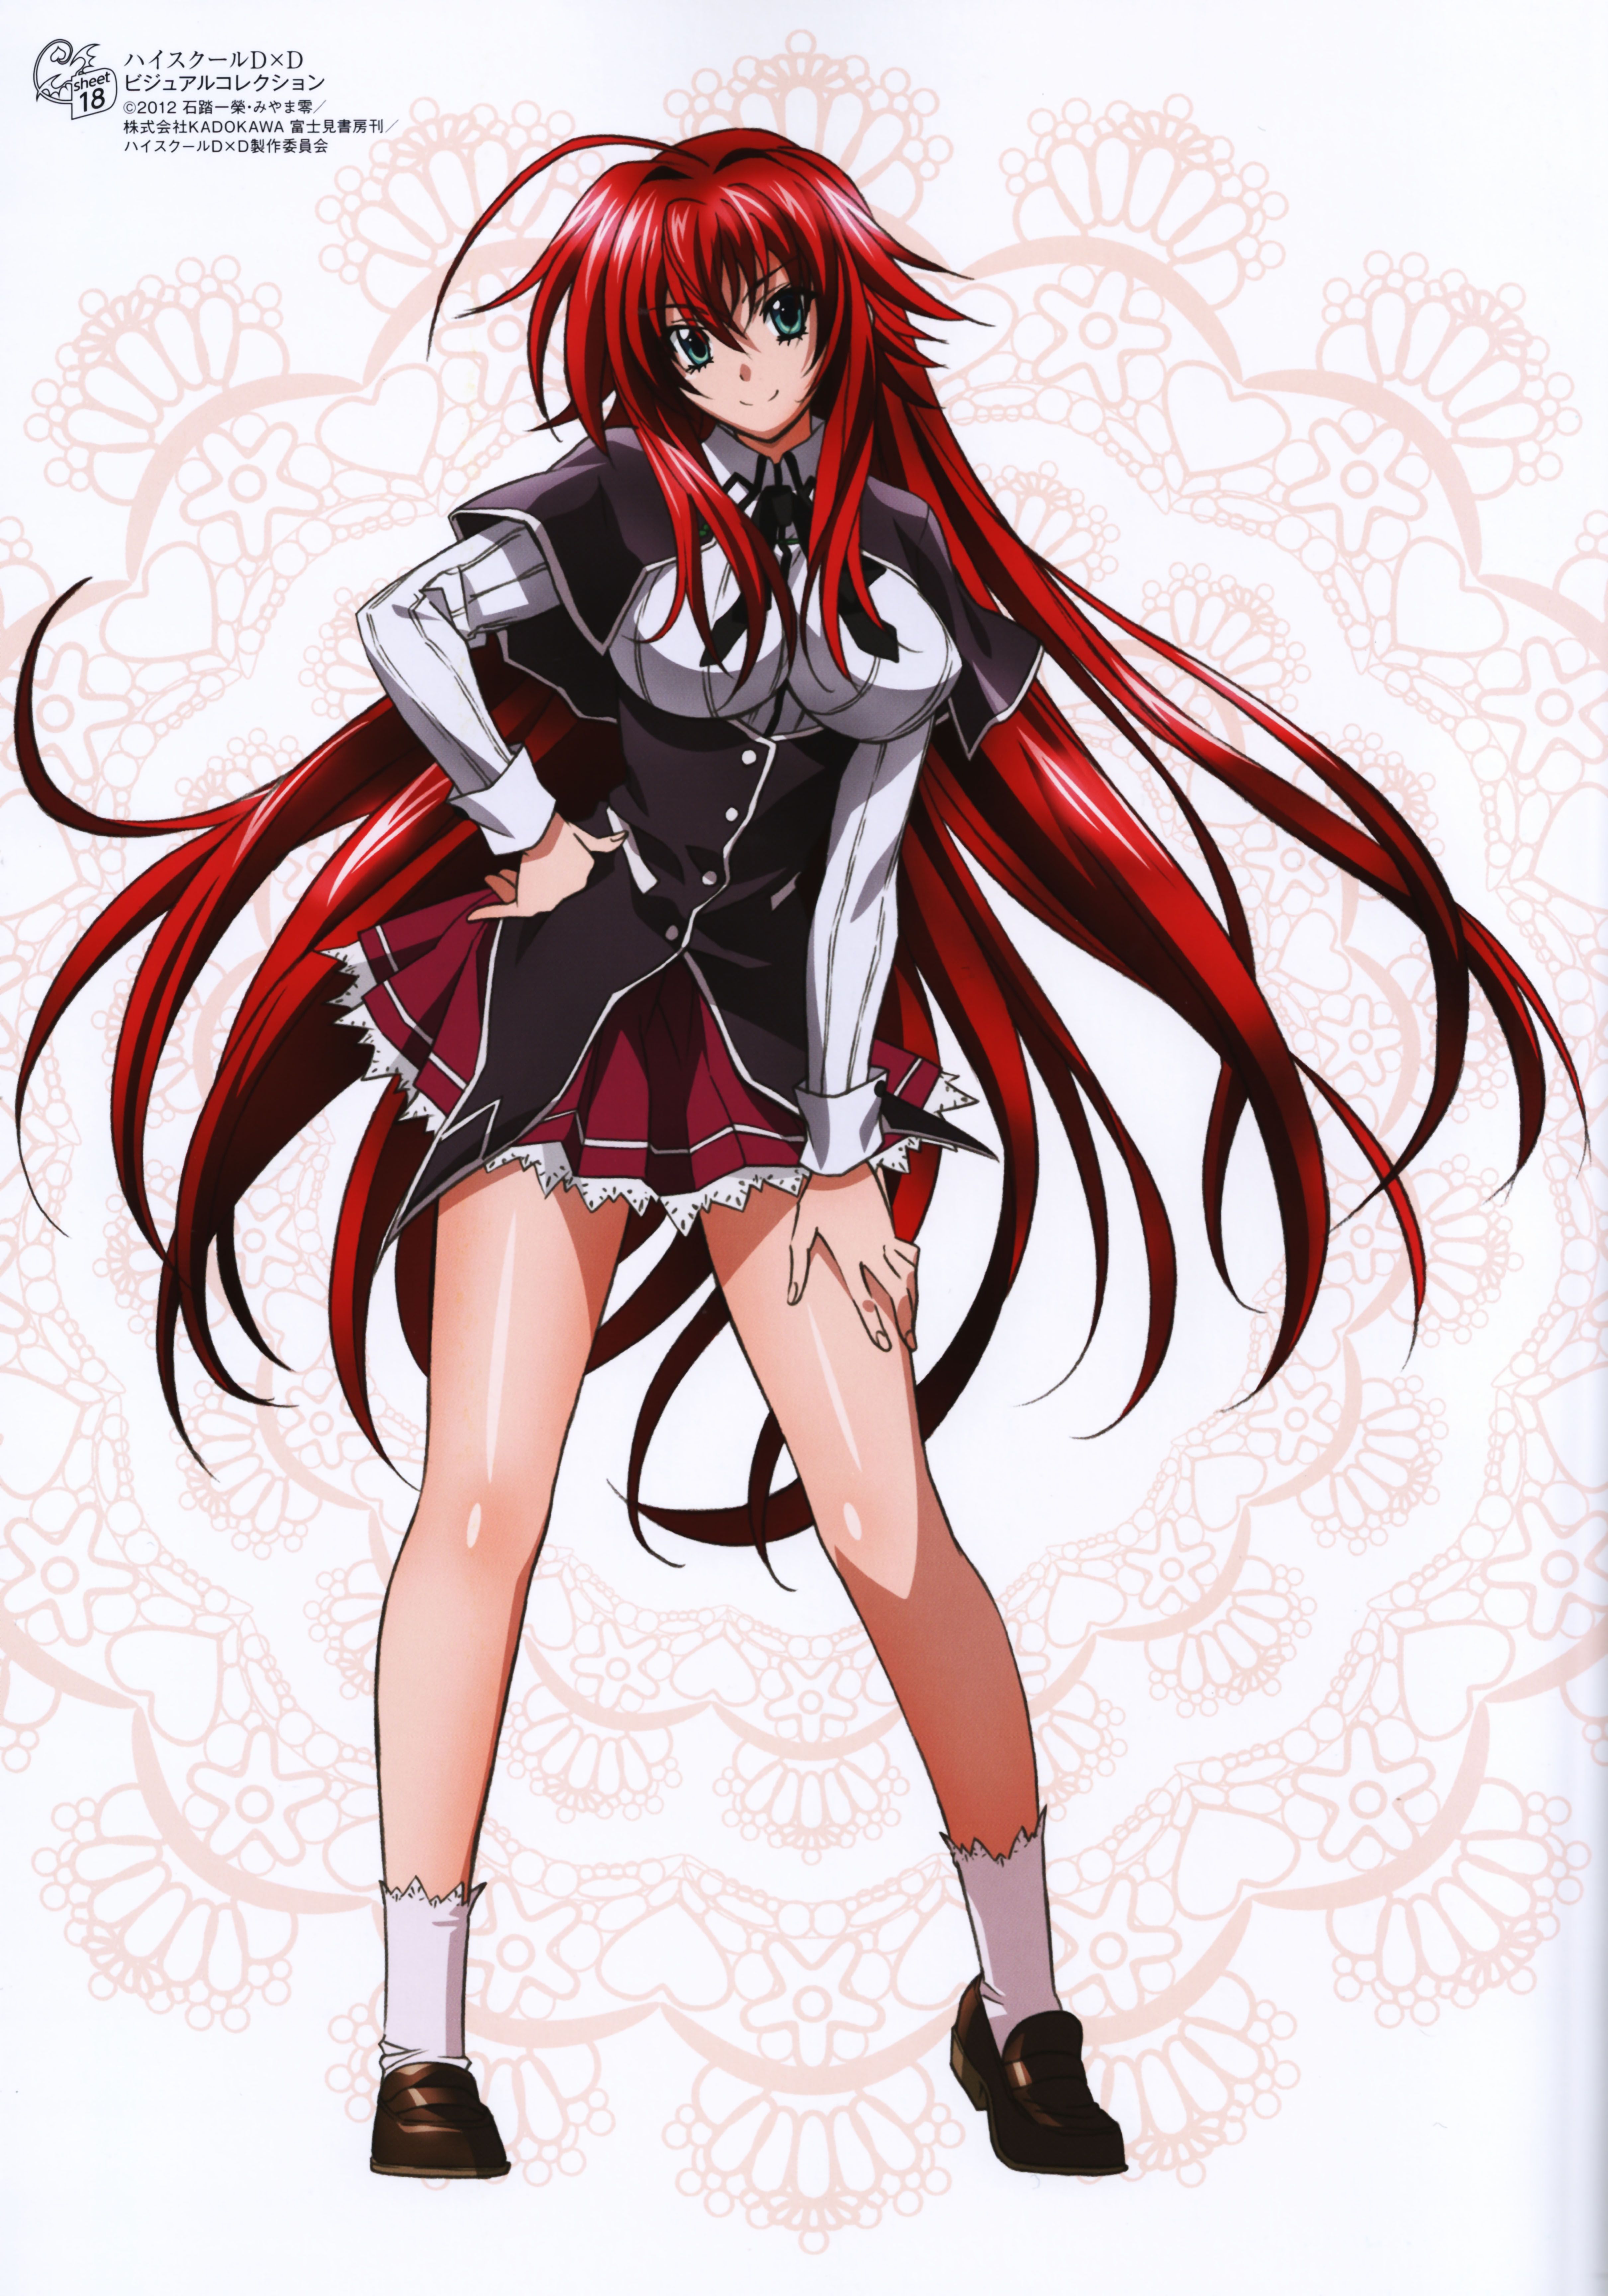 Rias Gremory DxD Anime Image Board